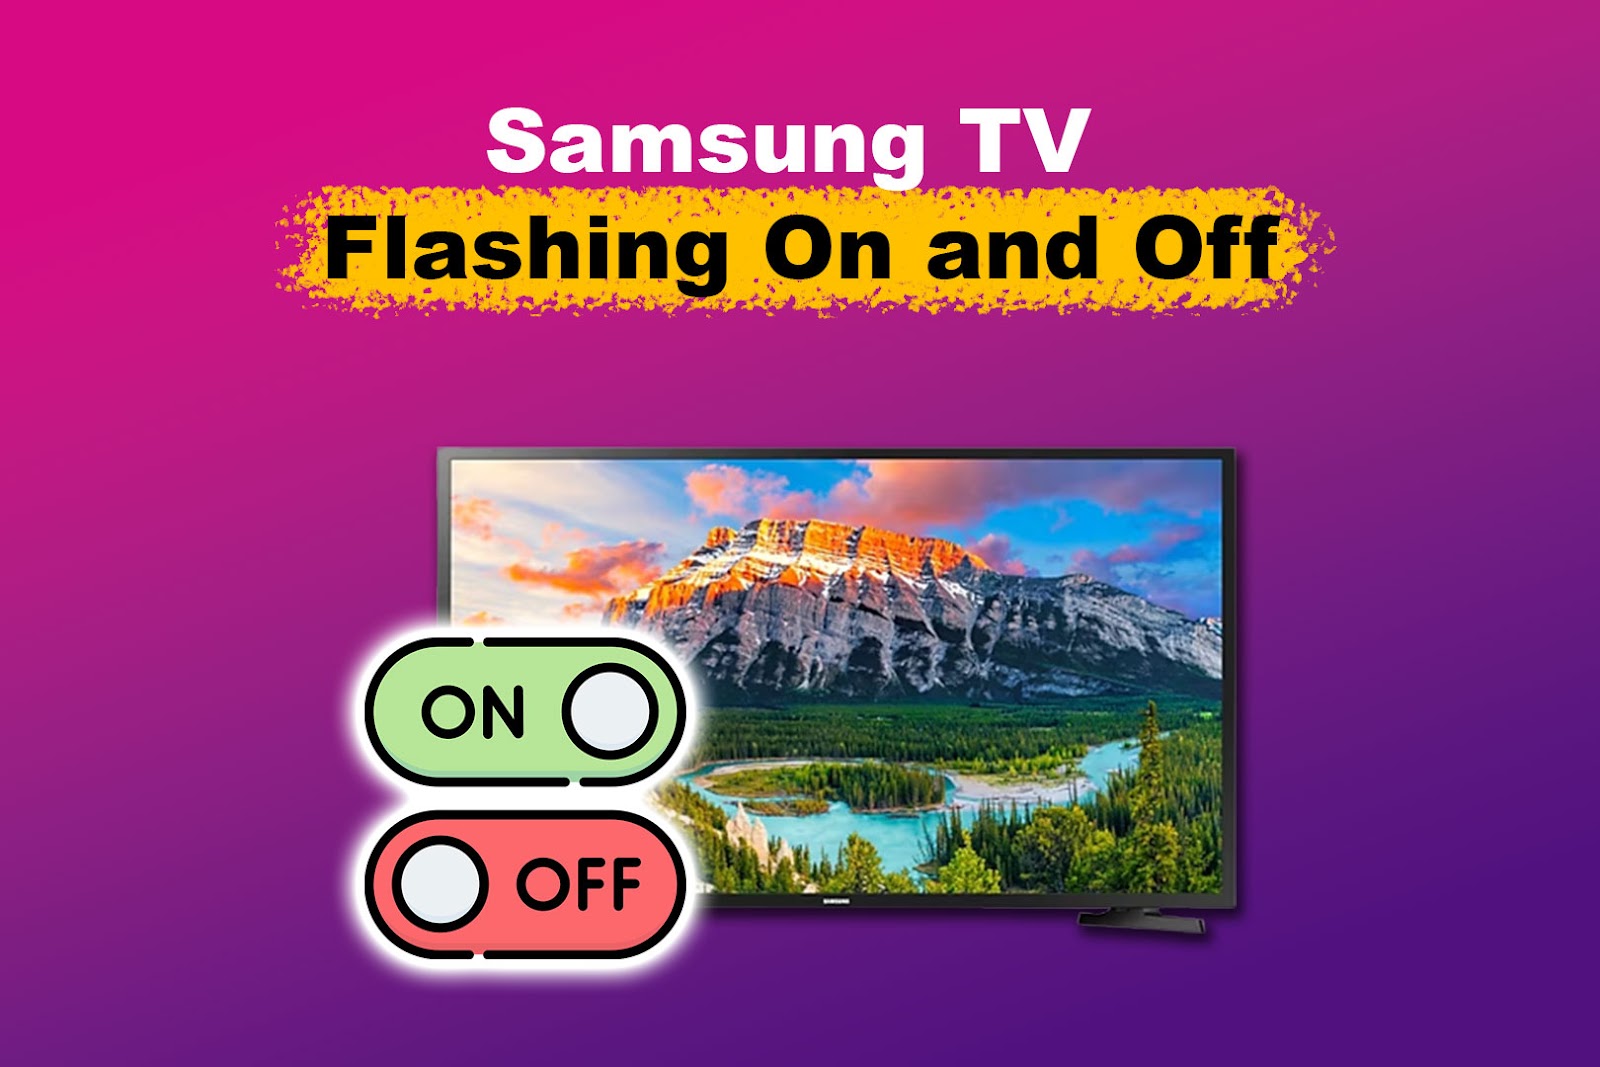 Samsung TV Flashing On and Off